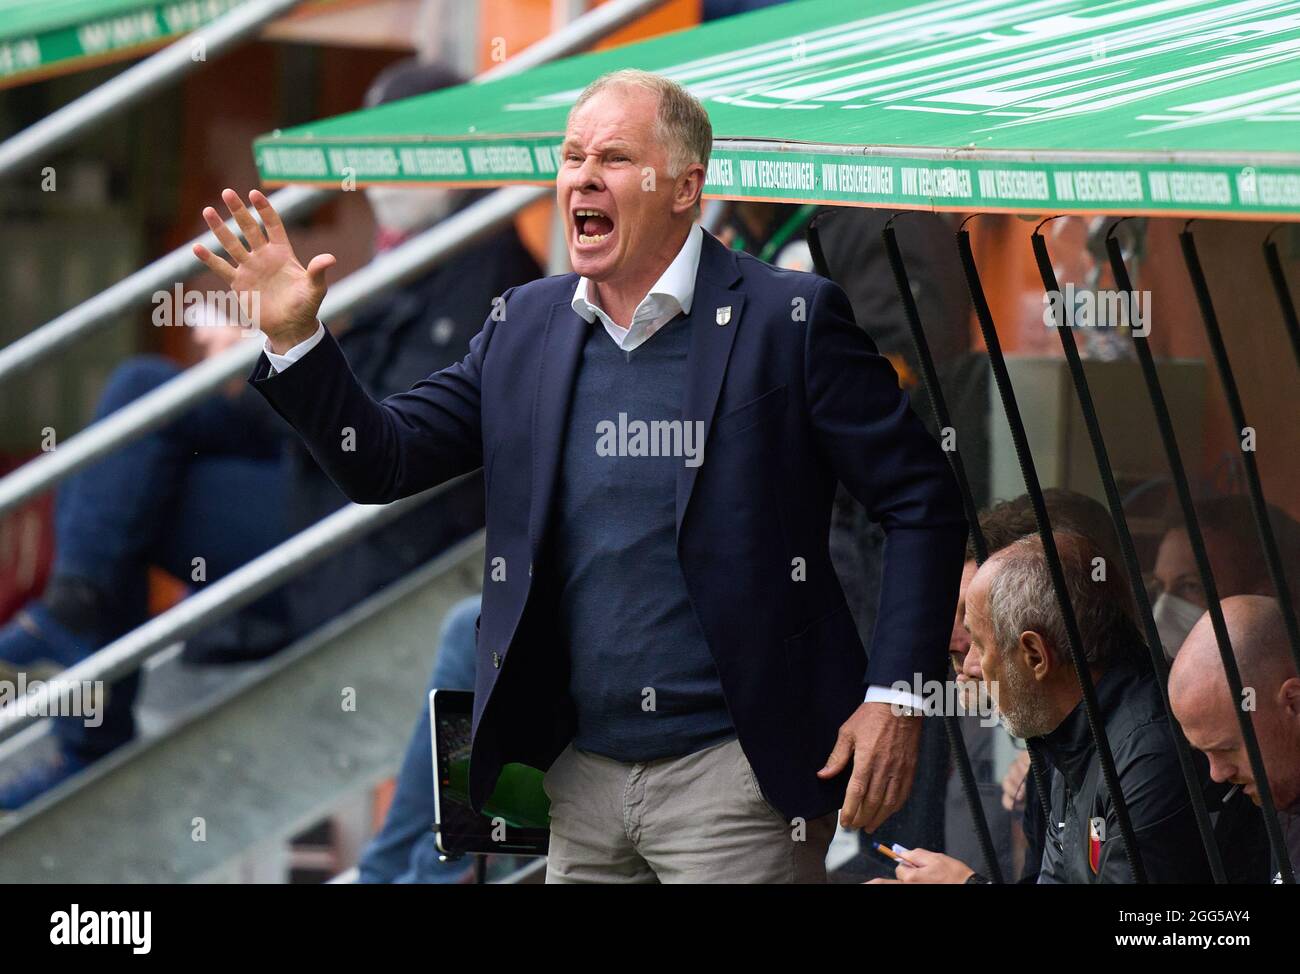 Stefan REUTER, Manager FCA  in the match FC AUGSBURG - BAYER 04 LEVERKUSEN 1-4 1.German Football League on August 28, 2021 in Augsburg, Germany  Season 2021/2022, matchday 3, 1.Bundesliga, 3.Spieltag. © Peter Schatz / Alamy Live News    - DFL REGULATIONS PROHIBIT ANY USE OF PHOTOGRAPHS as IMAGE SEQUENCES and/or QUASI-VIDEO - Stock Photo